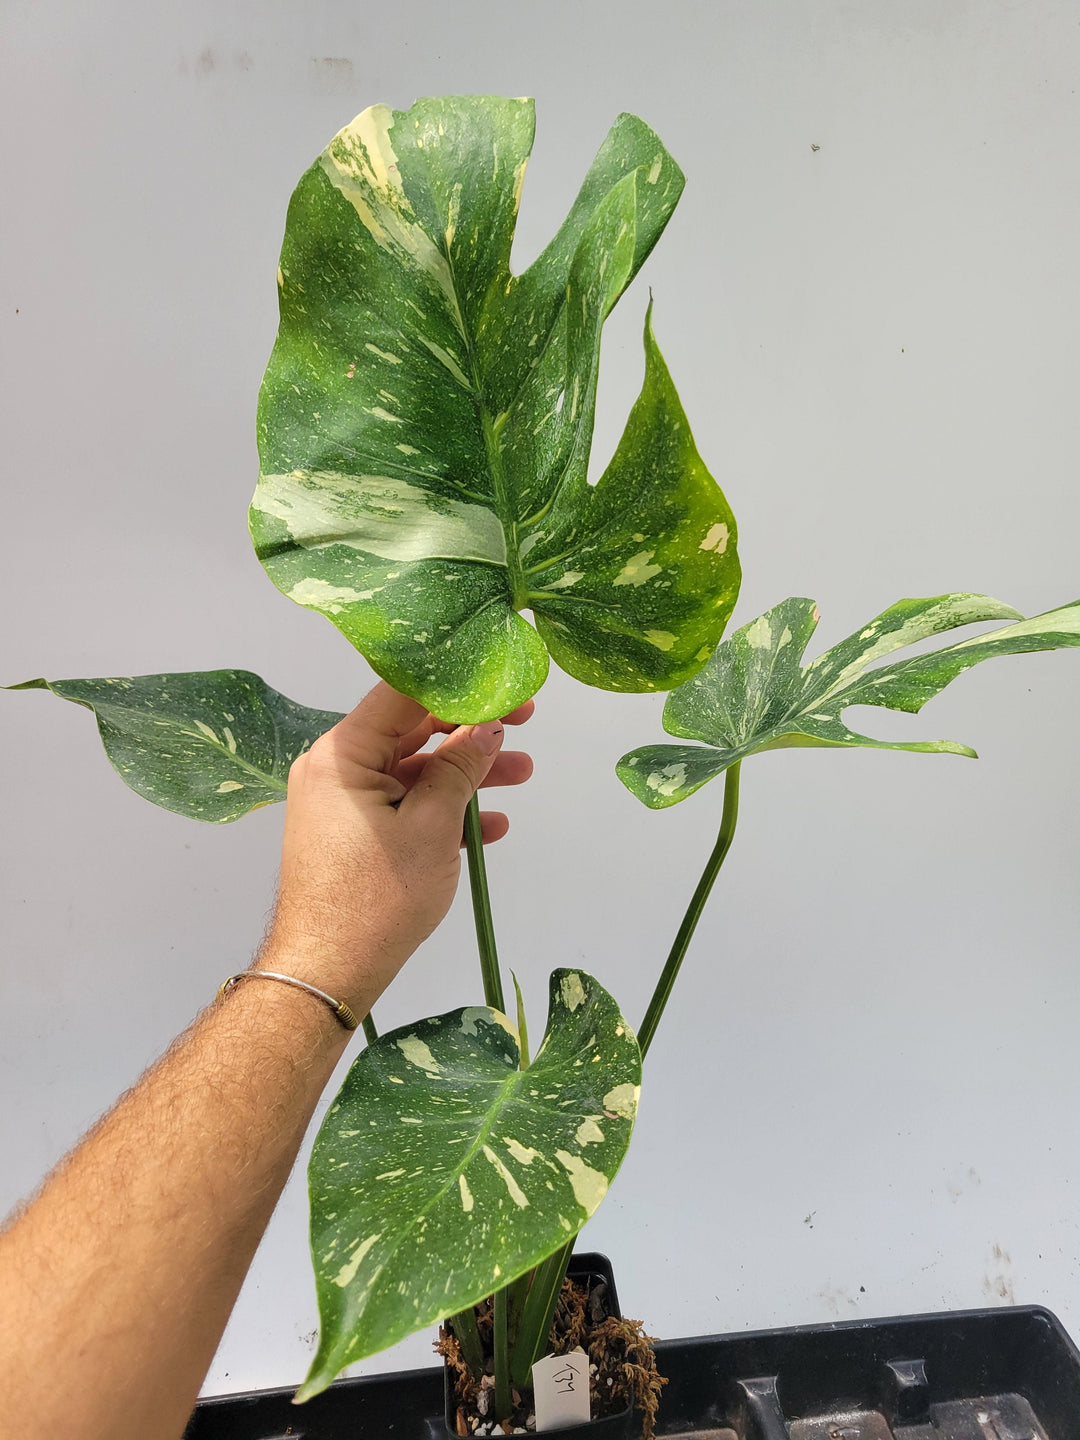 Monstera Thai Constellation,  XL size,  Highly variegated, Japanese Cultivar, exact plant pictured  US Seller #t37